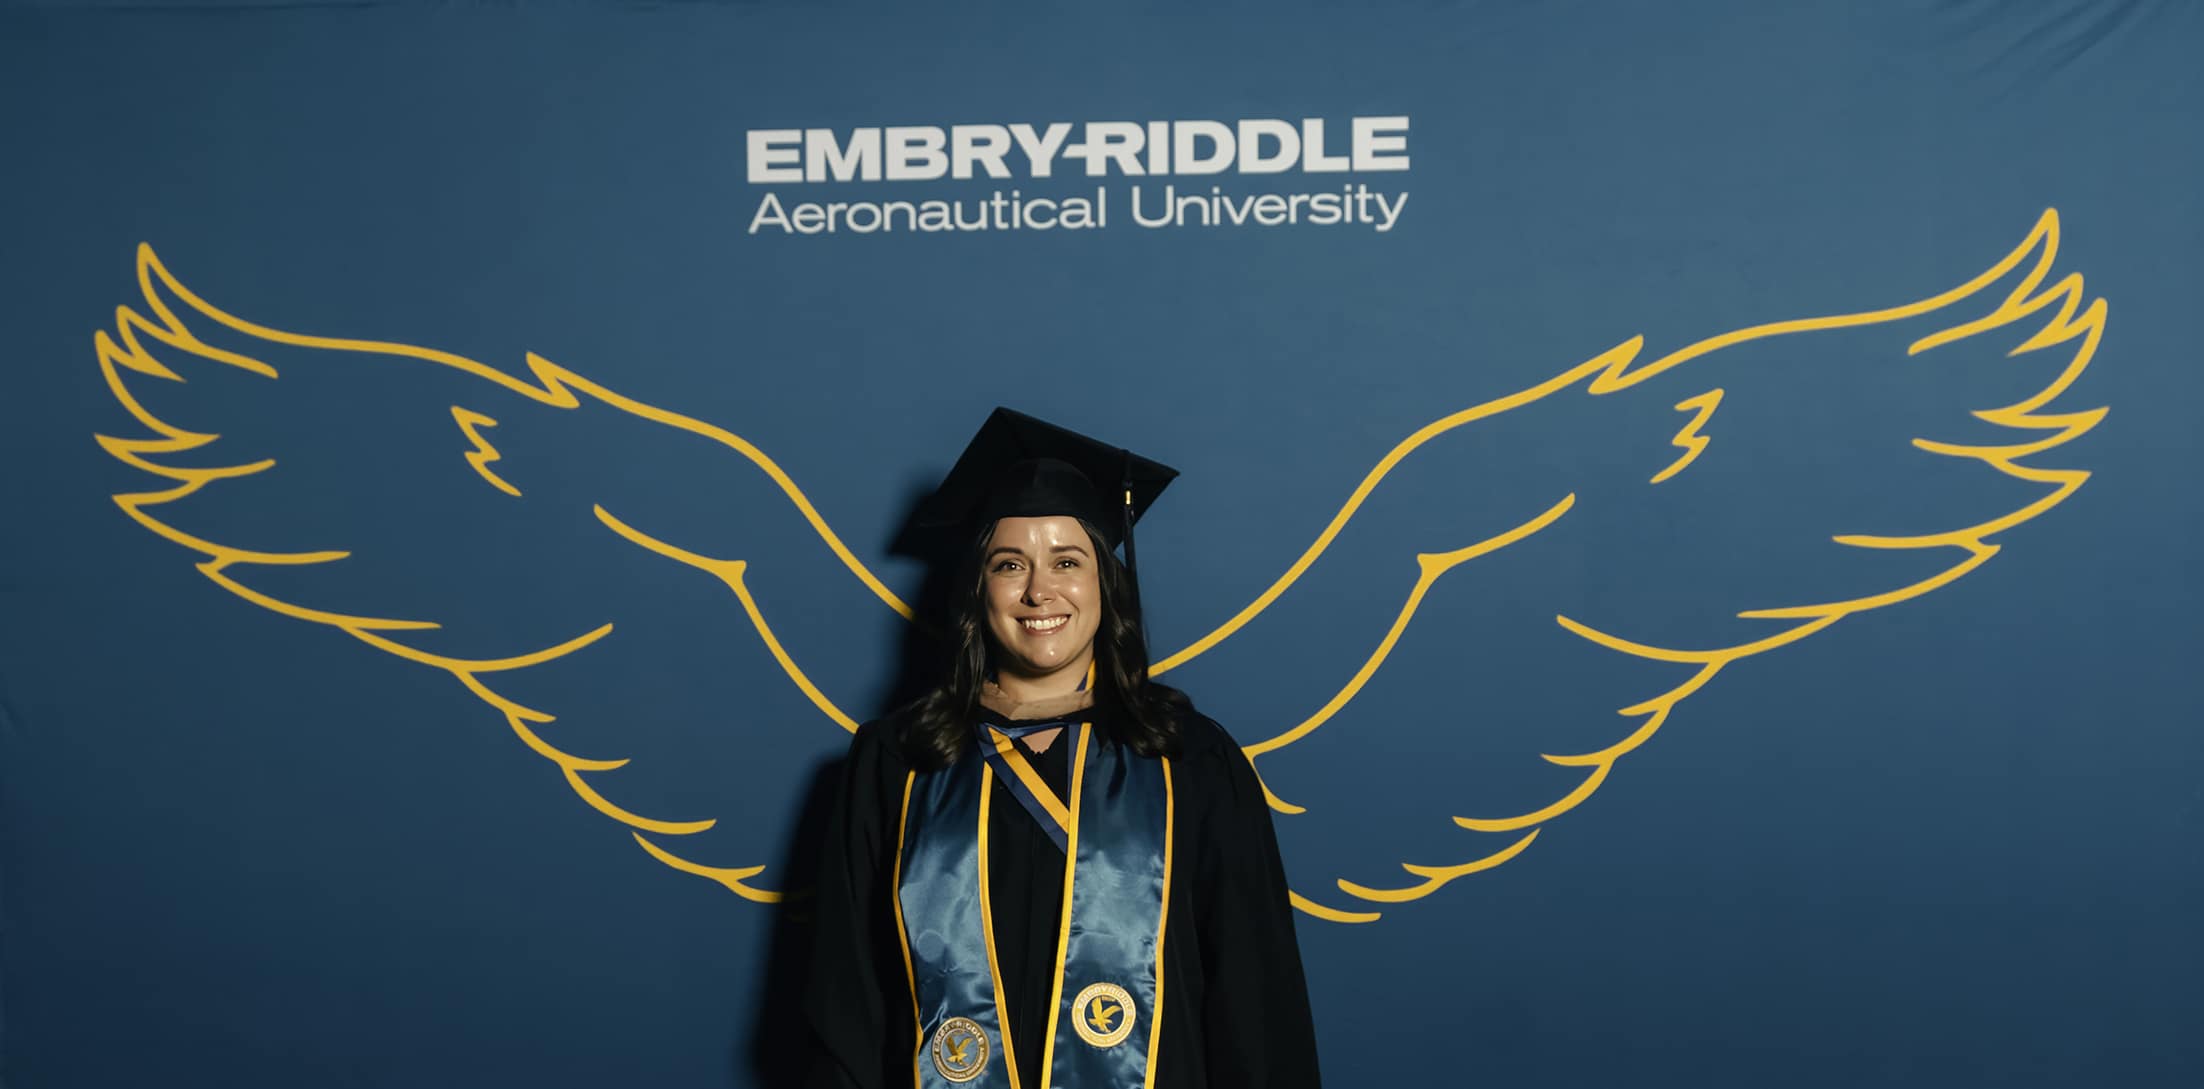 Woman in cap and gown with eagle wings on backdrop behind her. 